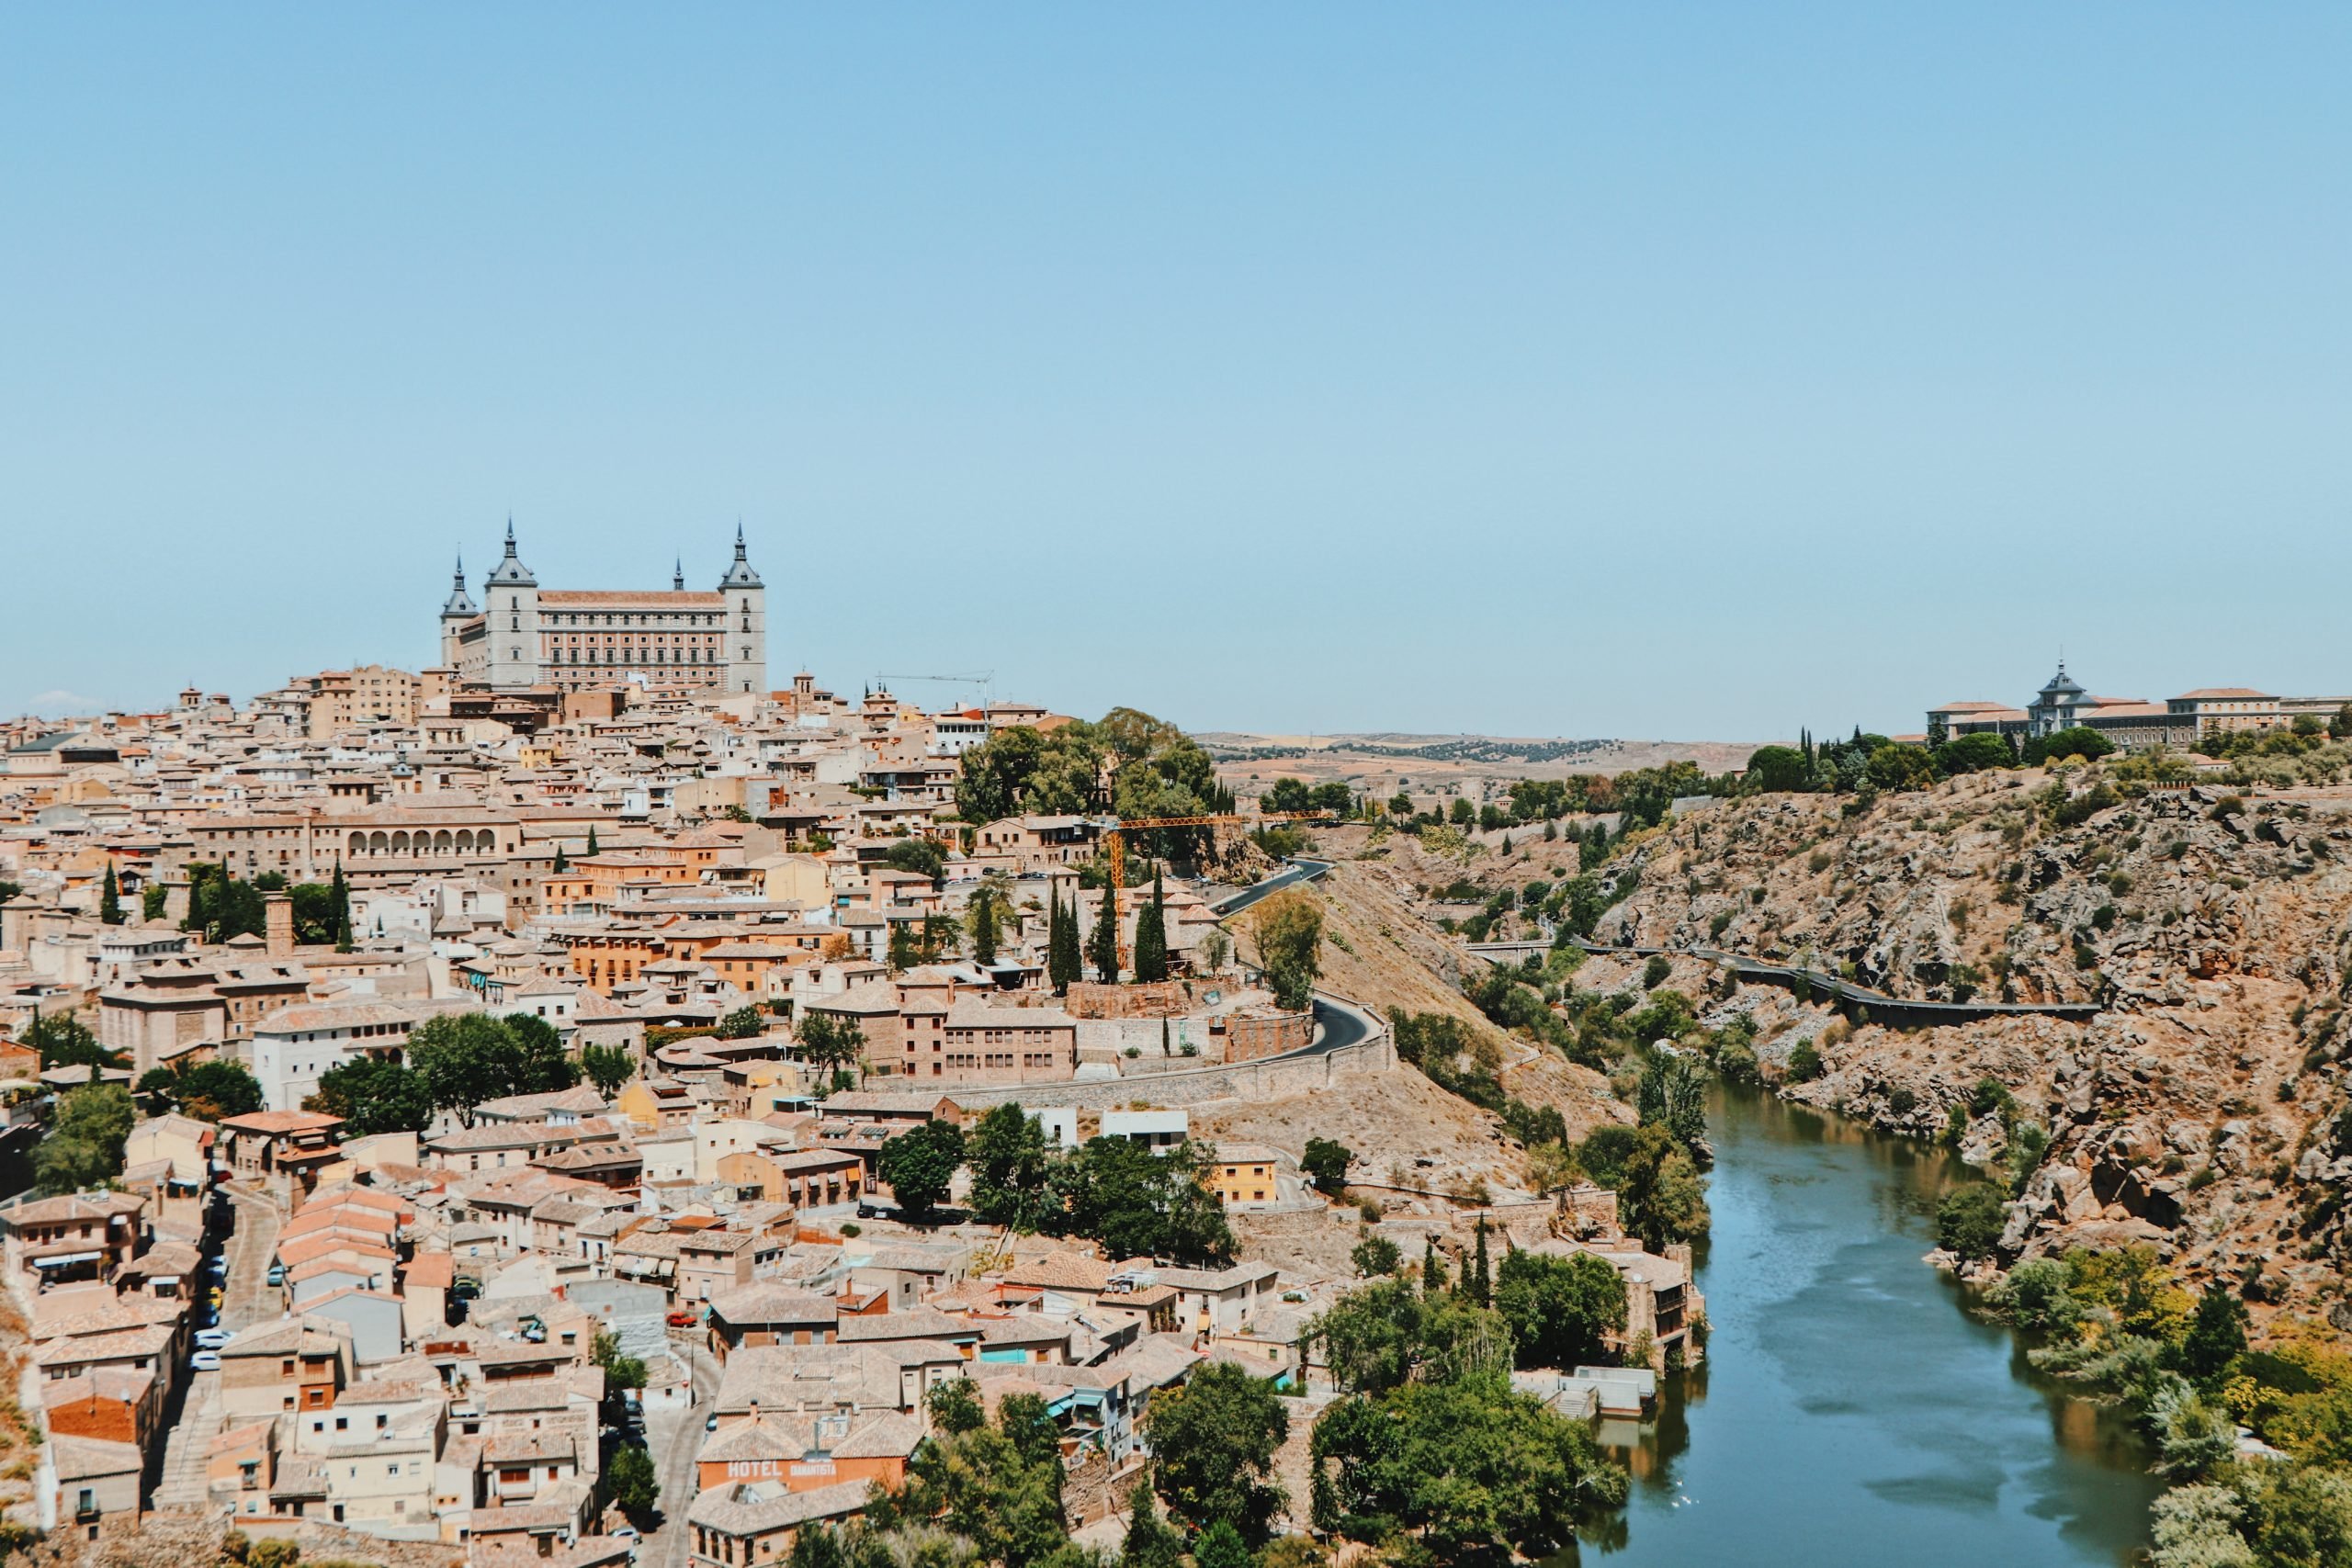 How To Get From Madrid Airport To Toledo - All Possible Ways